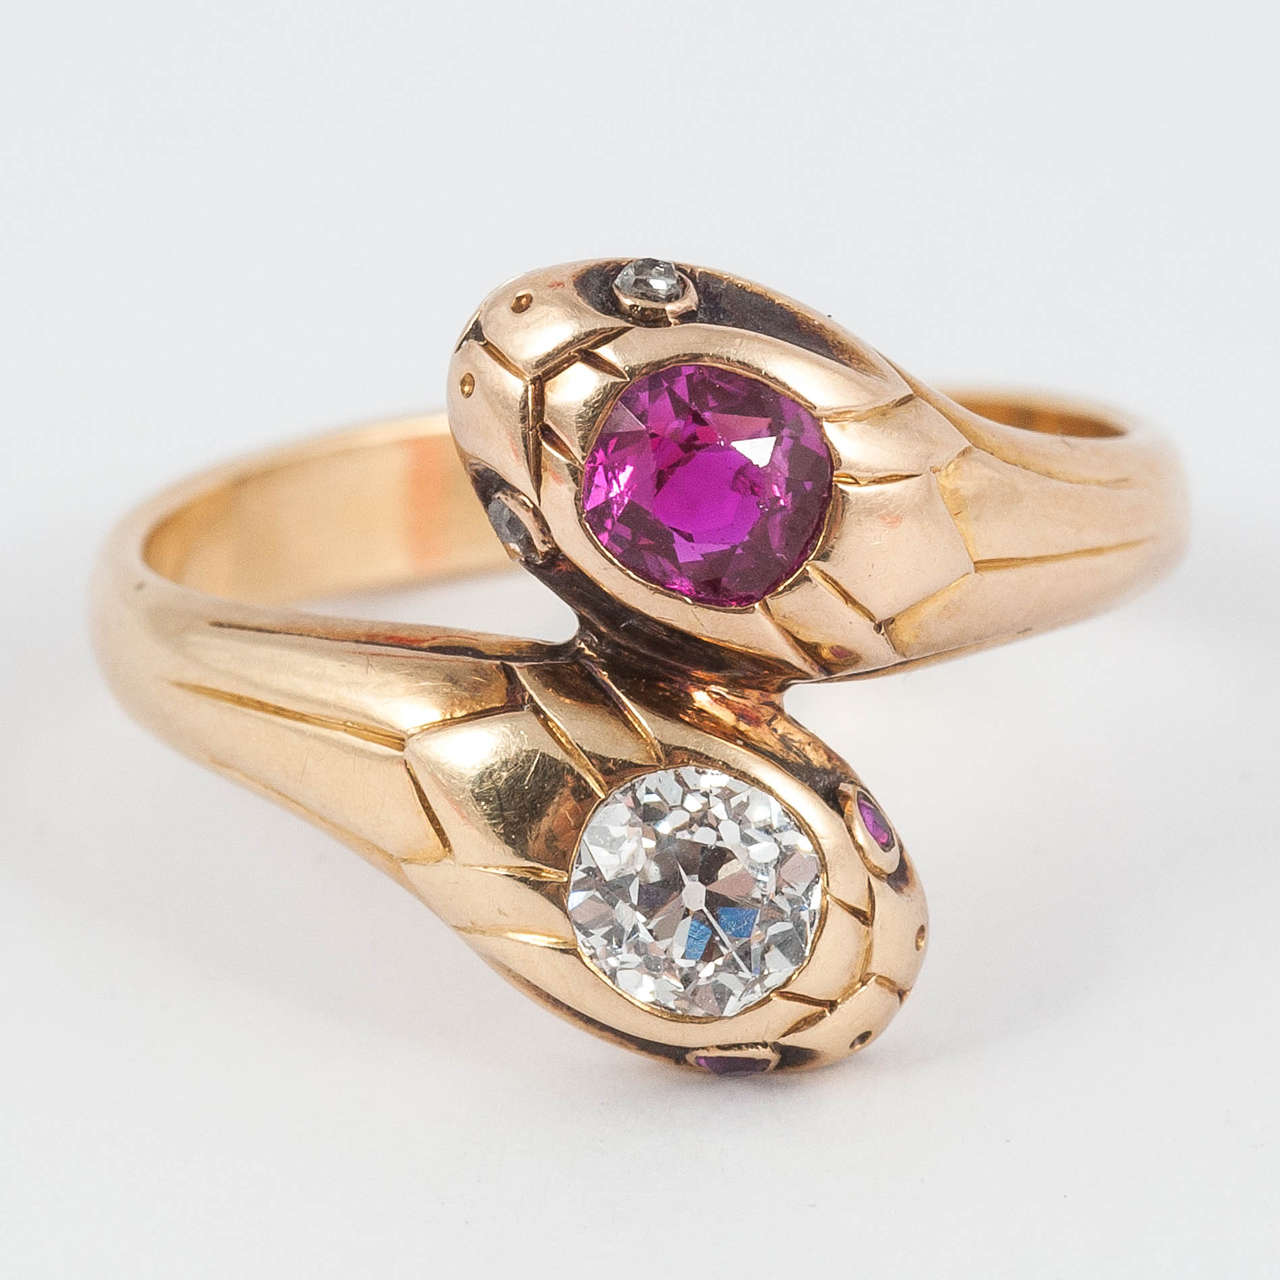 Stunning late Victorian double serpent Ring set with natural Ruby and Old Cut Diamond.

Ring size L 1/2